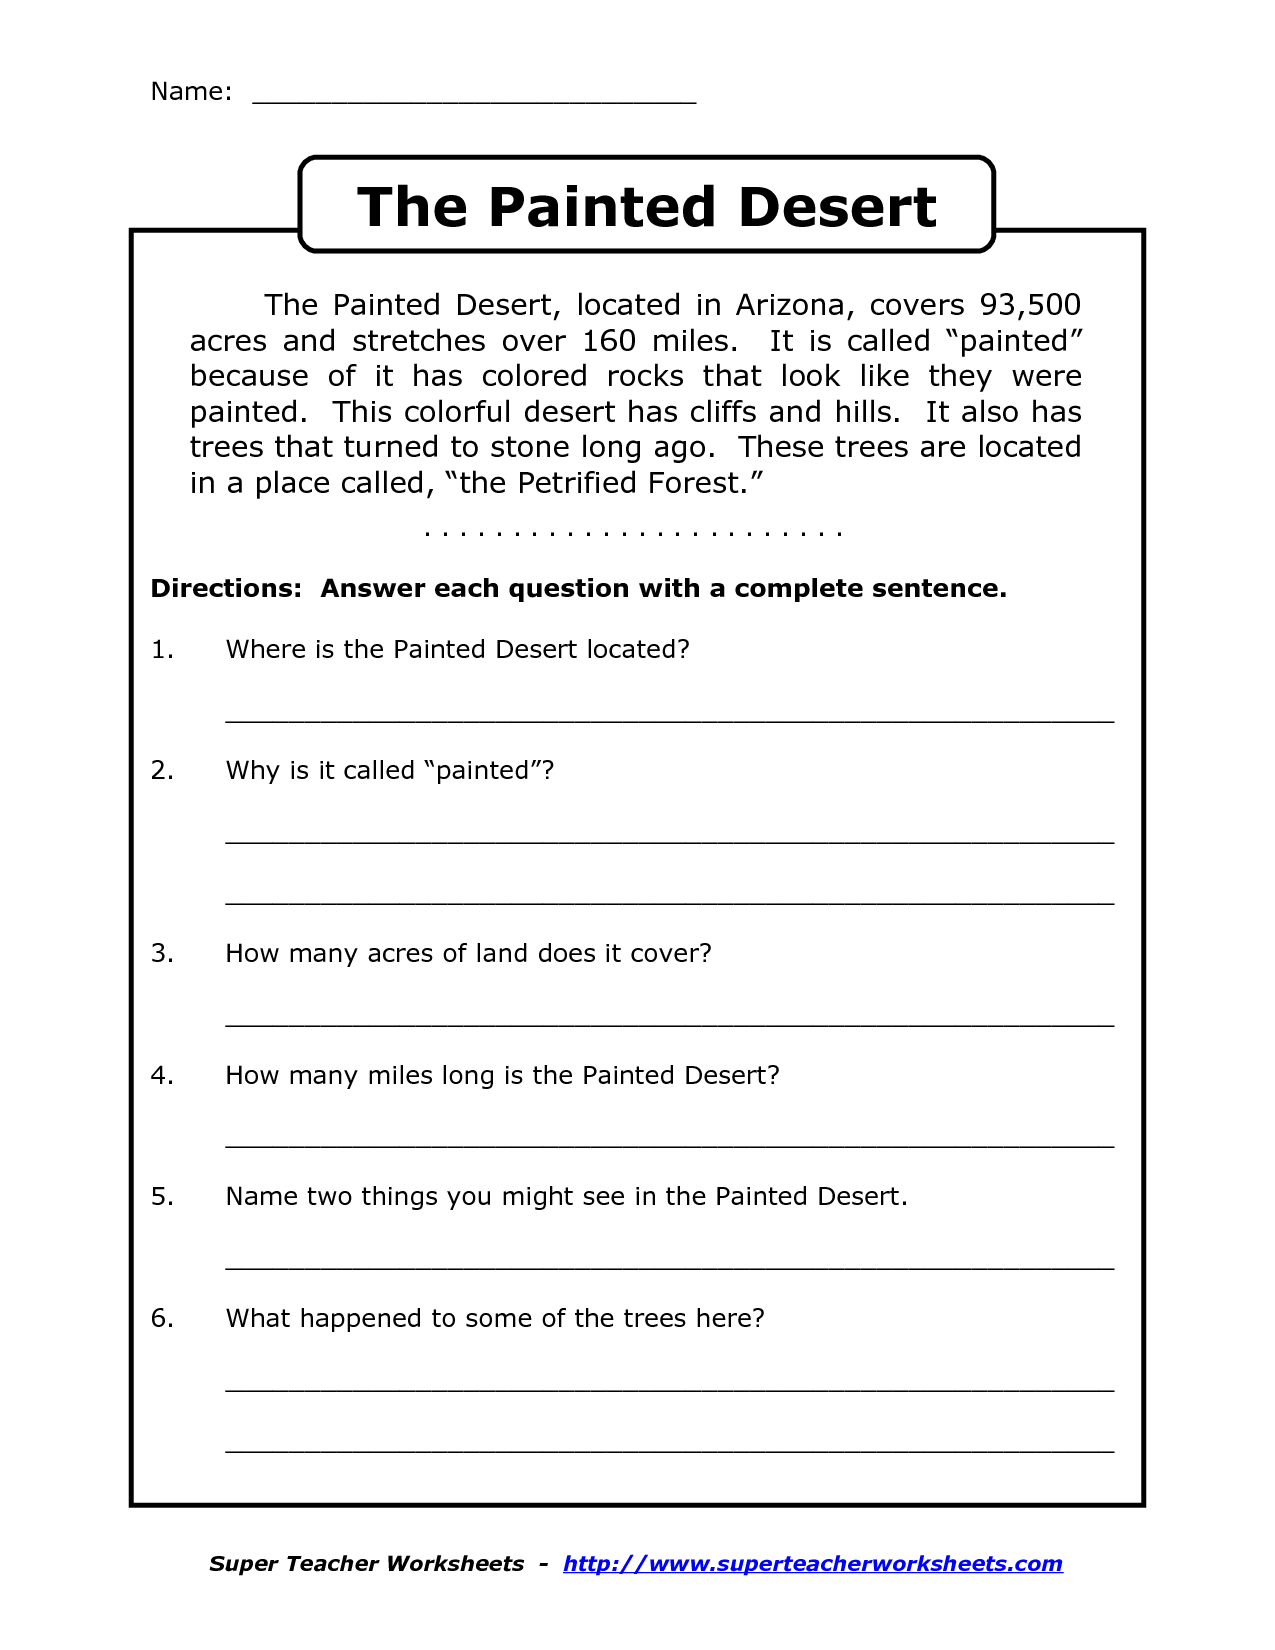 Reading Worksheets For 4Th Grade | Reading Comprehension Worksheets - Third Grade Reading Worksheets Free Printable